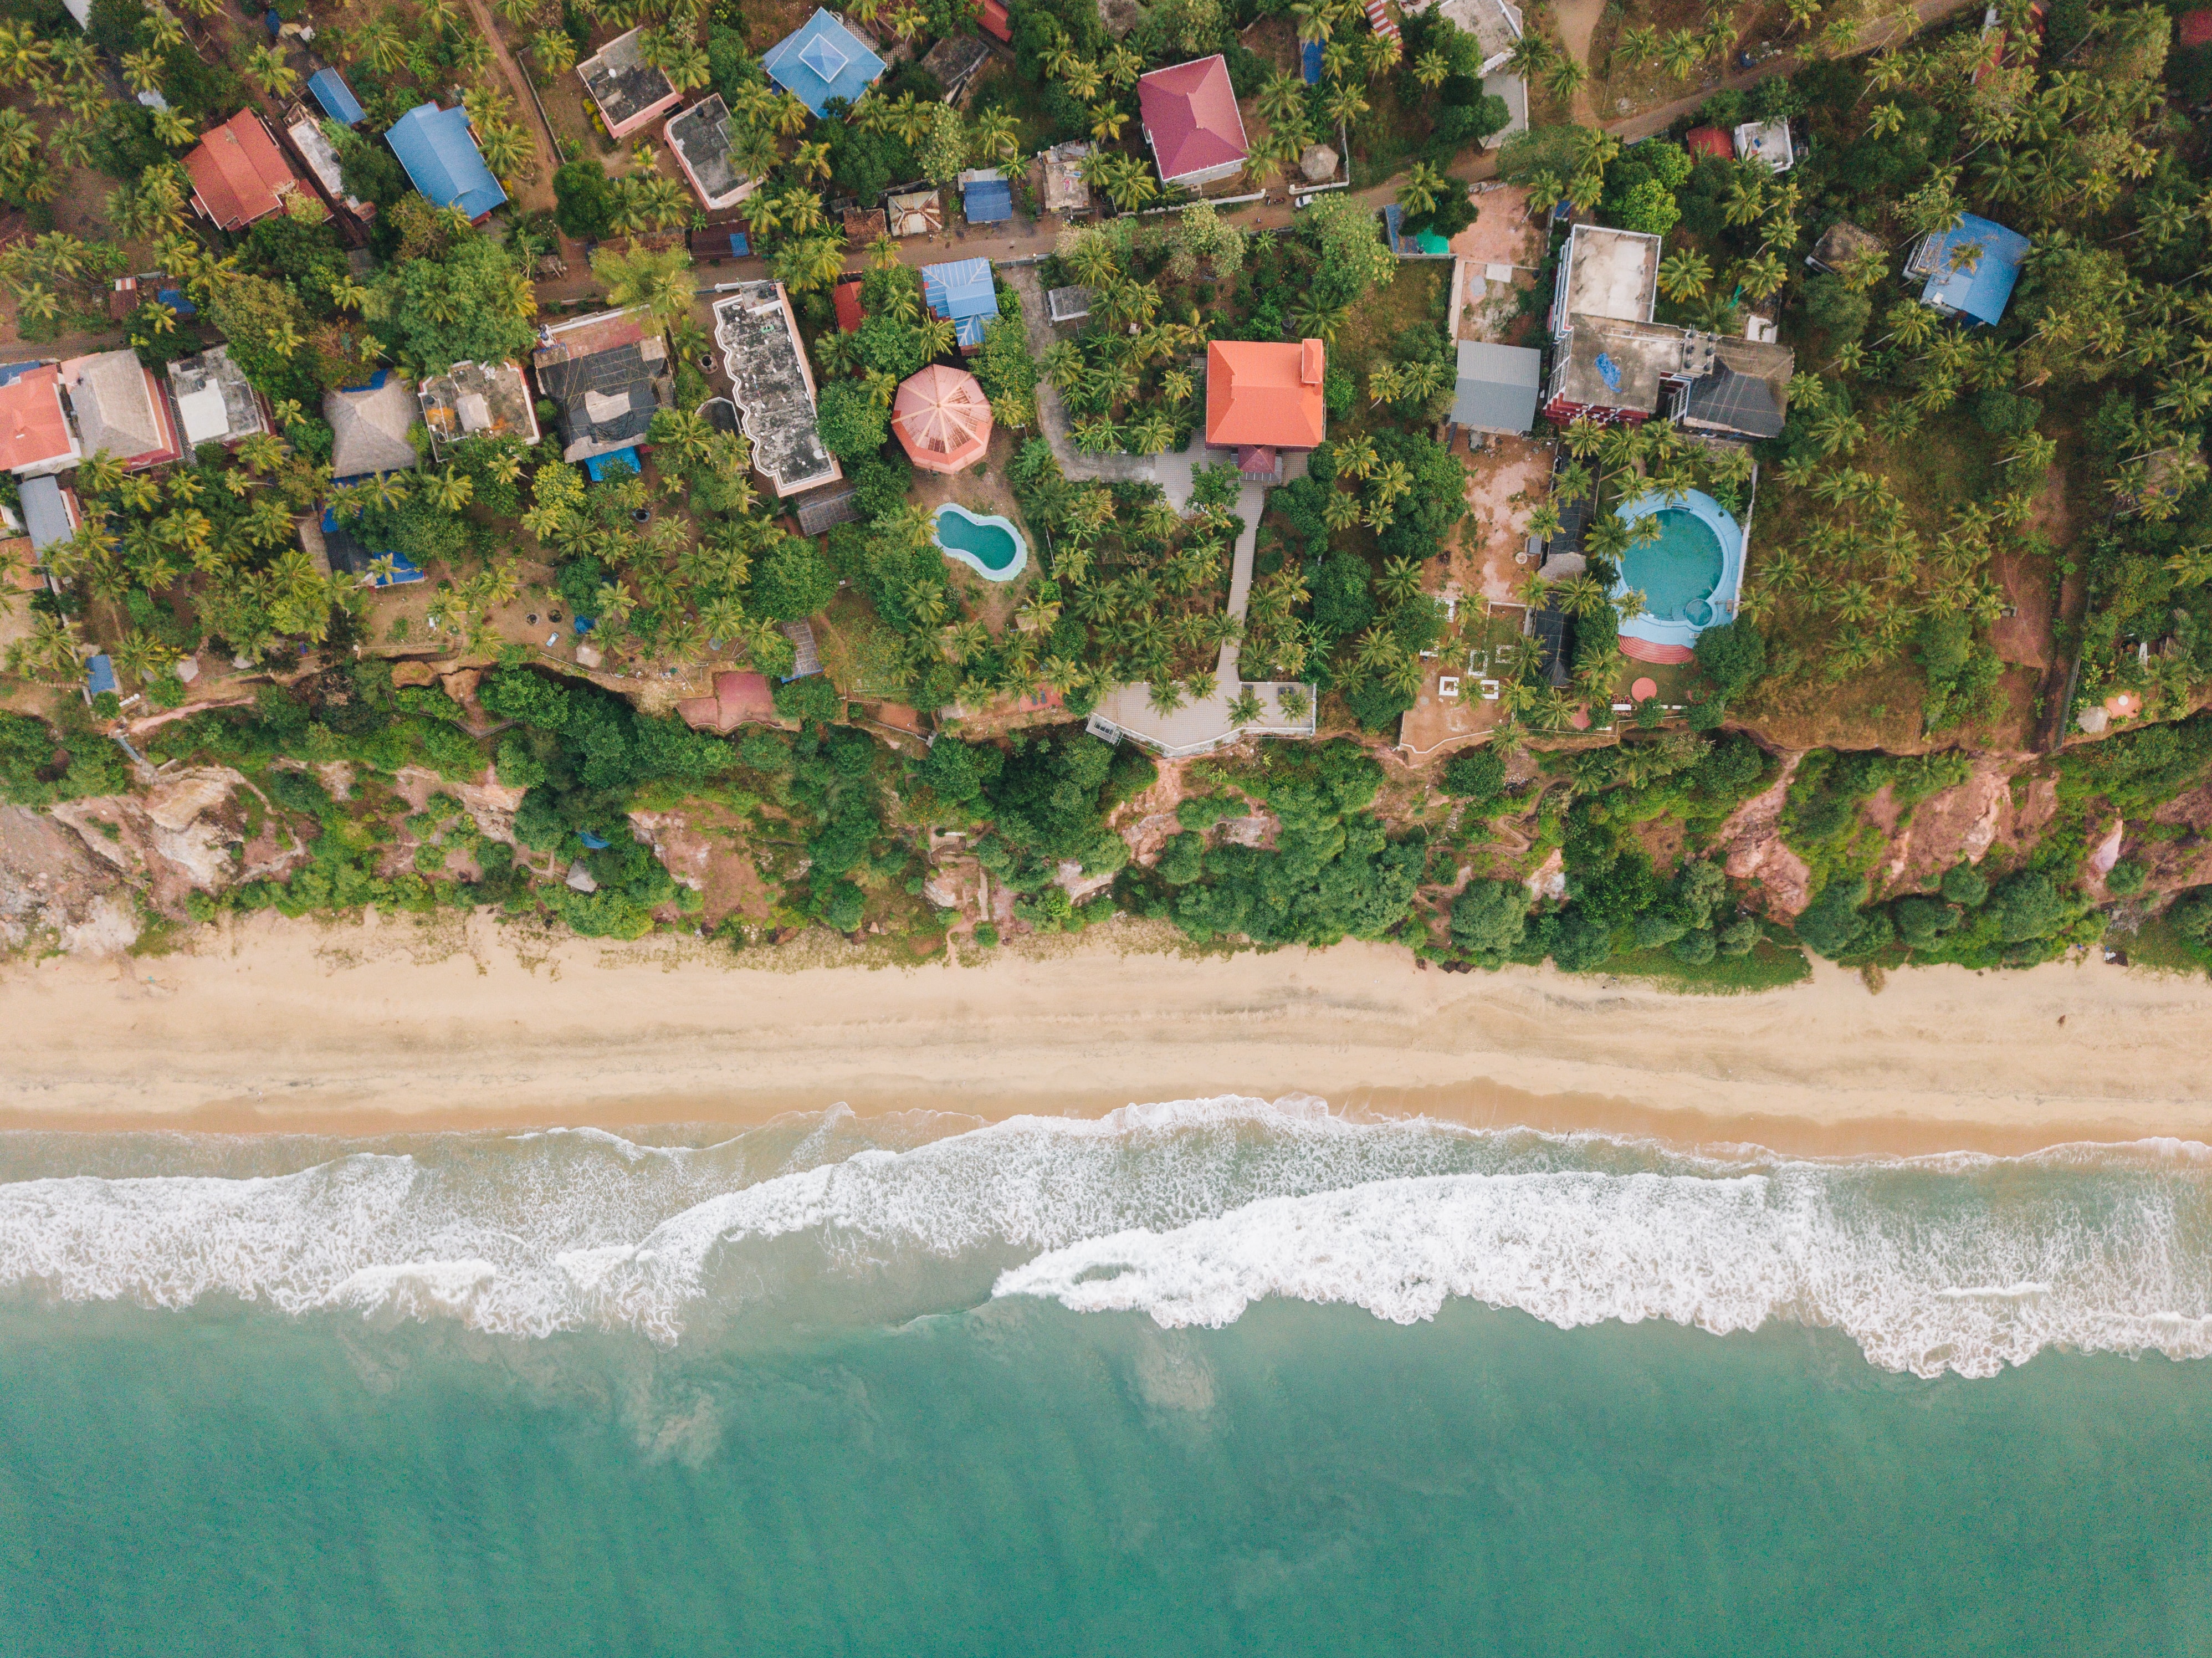 shore, view from above, nature, beach, palms, building, bank 4K Ultra